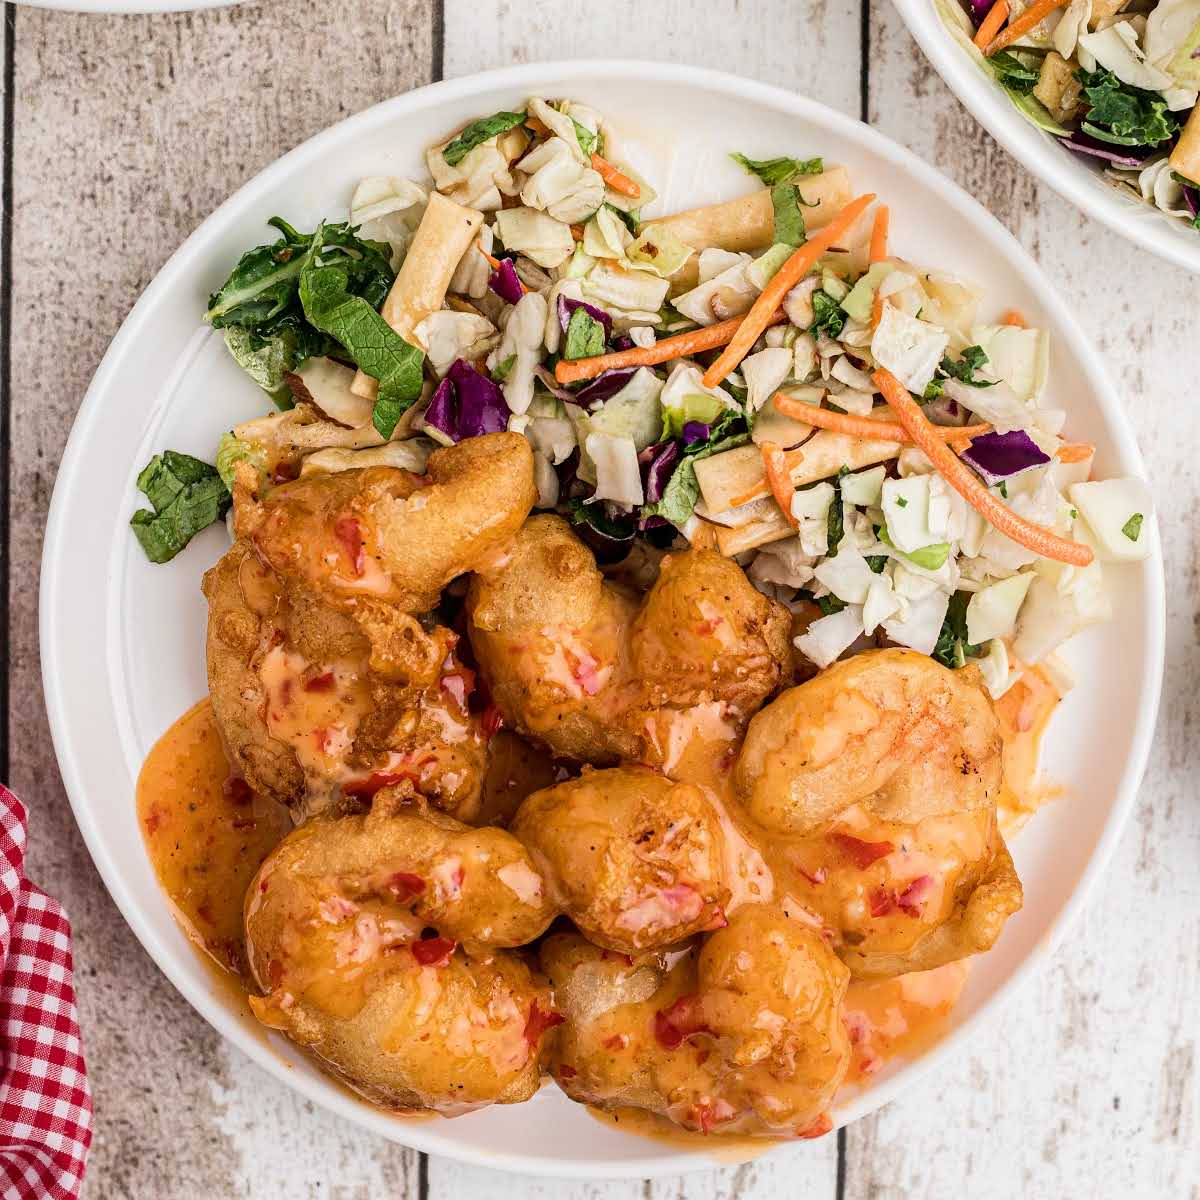 overhead image of battered shrimp that has been fried and coated in sauce with a side salad